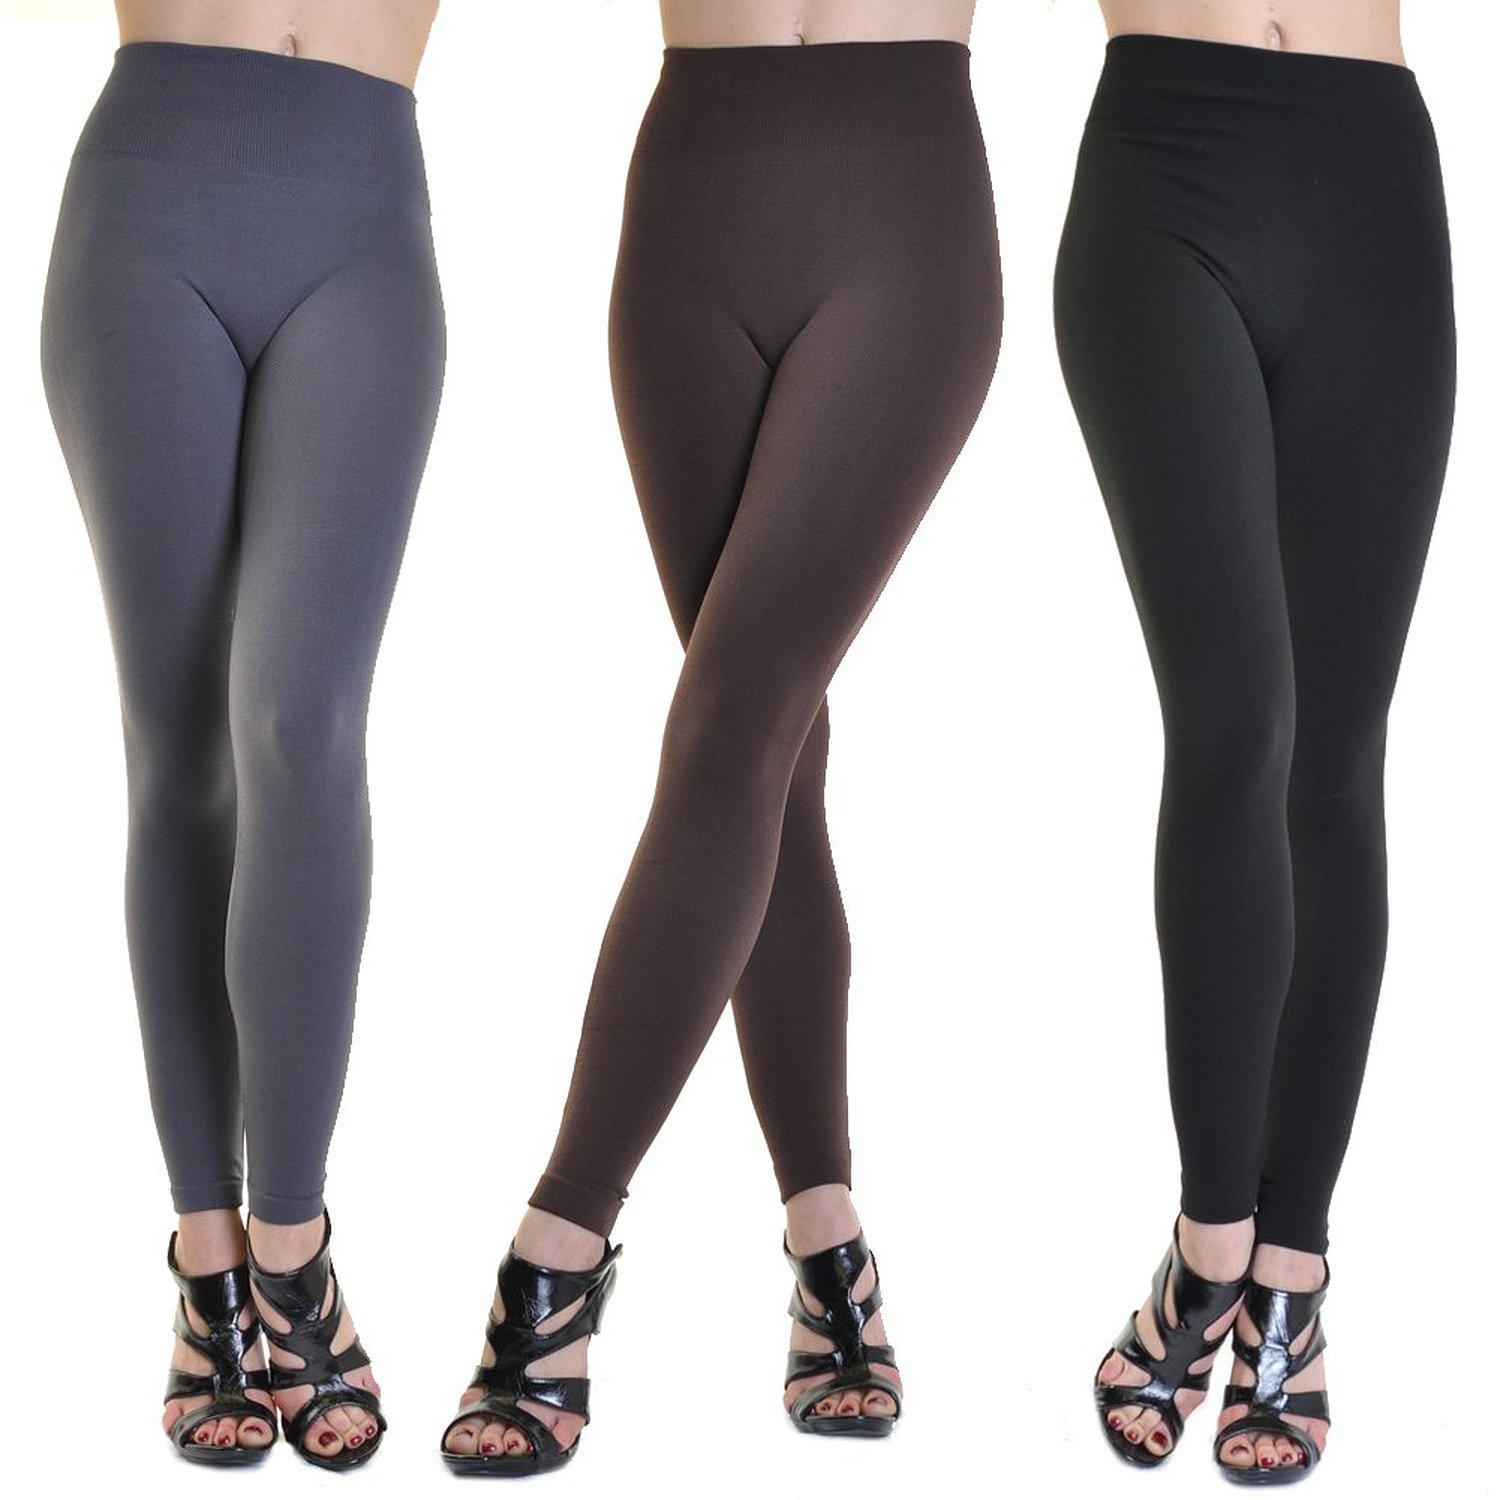 The Differences between Pantyhose, Tights and Leggings